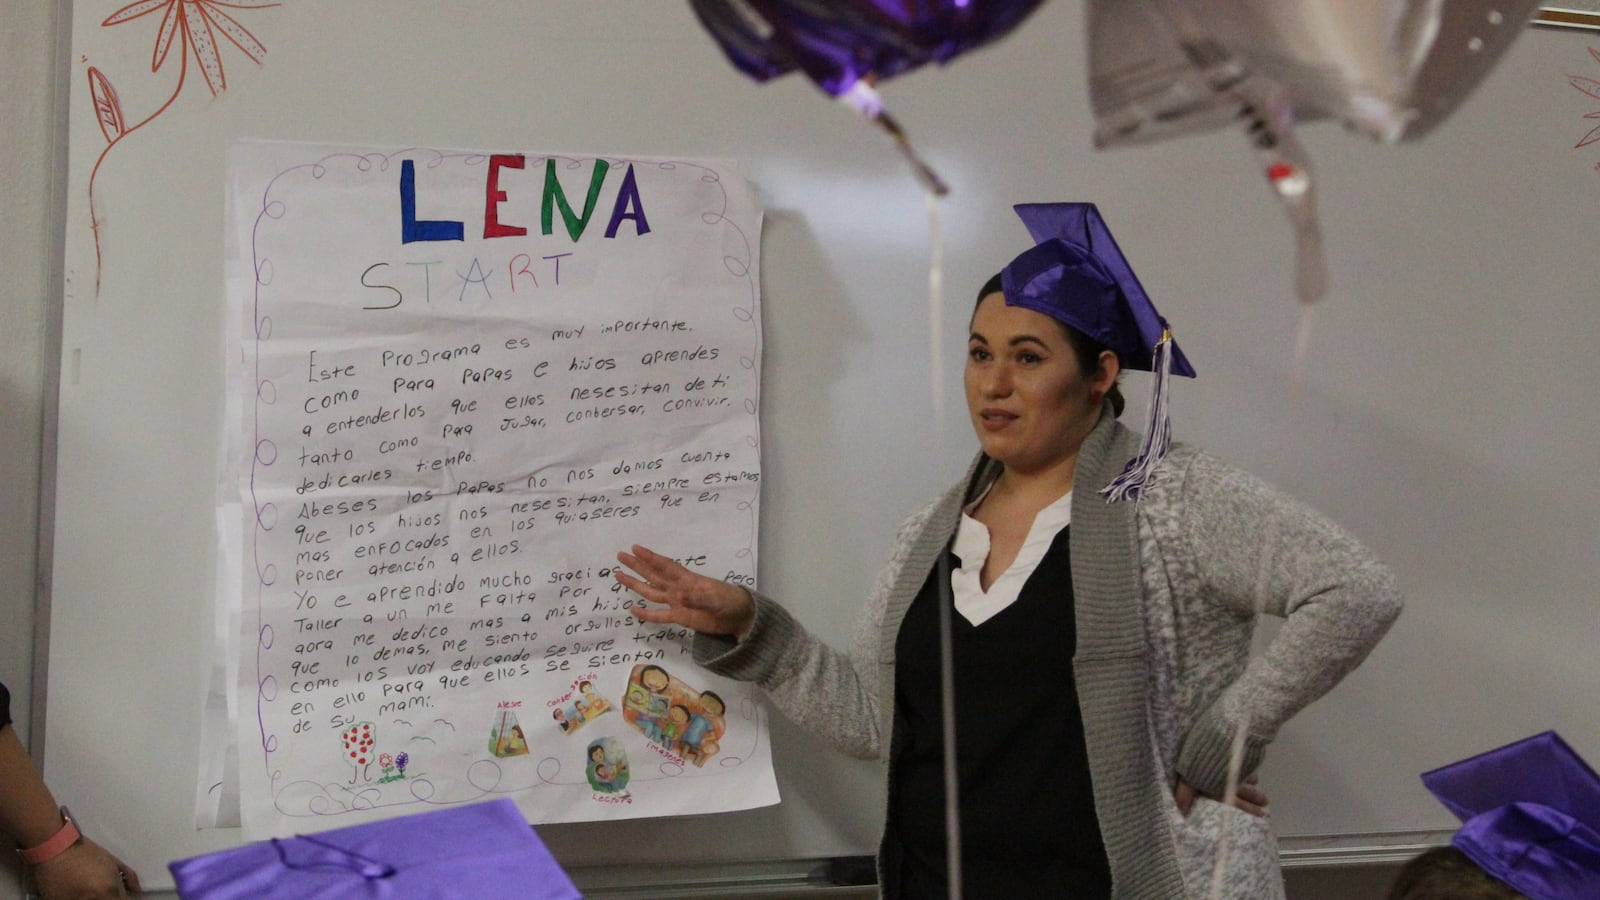 Yuliana Moreno told parents at her LENA Start graduation on Tuesday that her children have become more talkative because of the program.